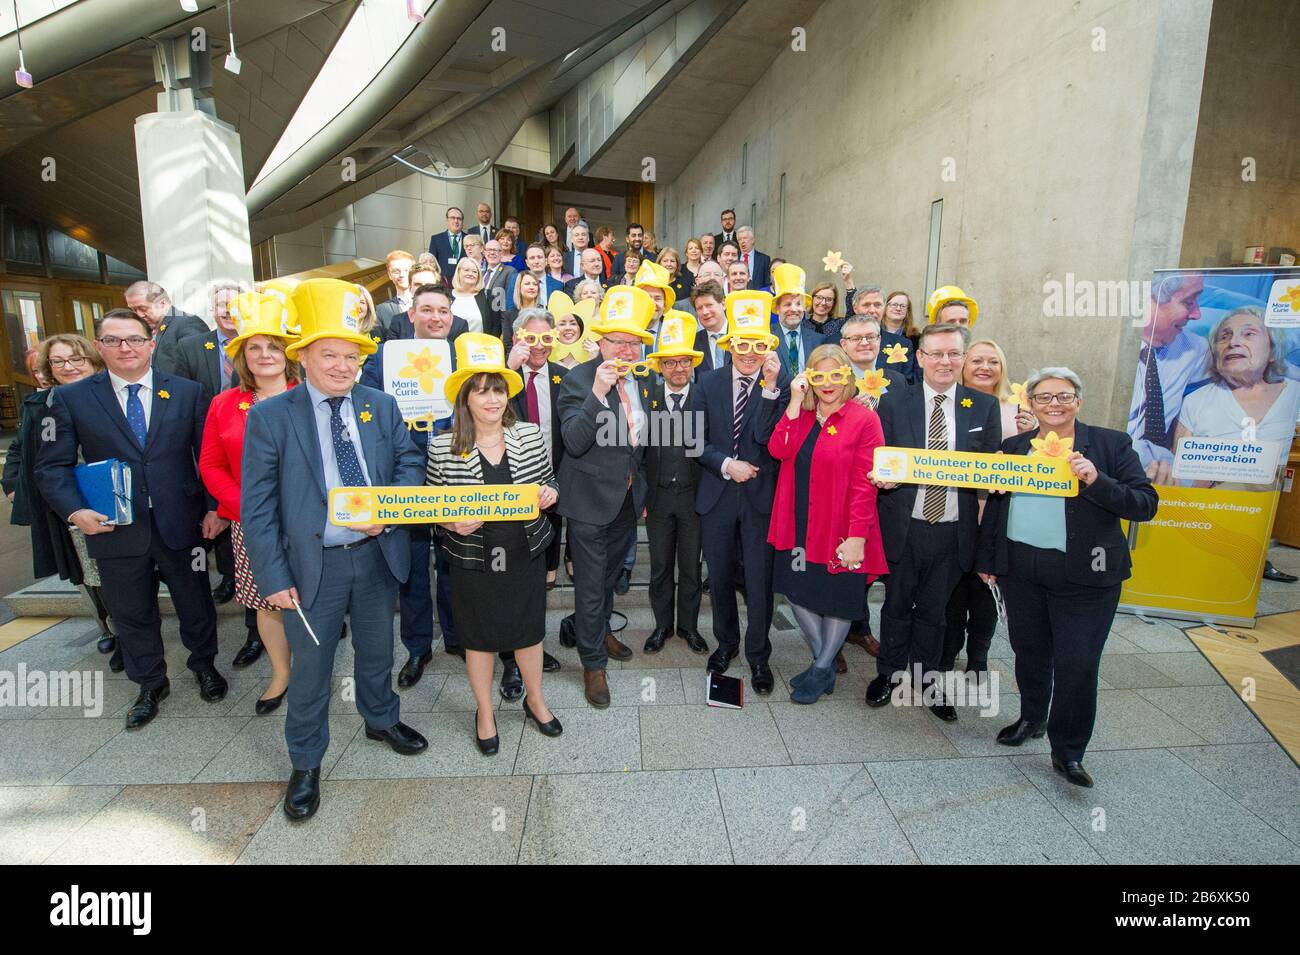 Edinburgh, UK. 12th Mar, 2020. Pictured: Photo call for Marie Curie Photo call for Marie Curie charity, in the Scottish Parliament. Credit: Colin Fisher/Alamy Live News Stock Photo